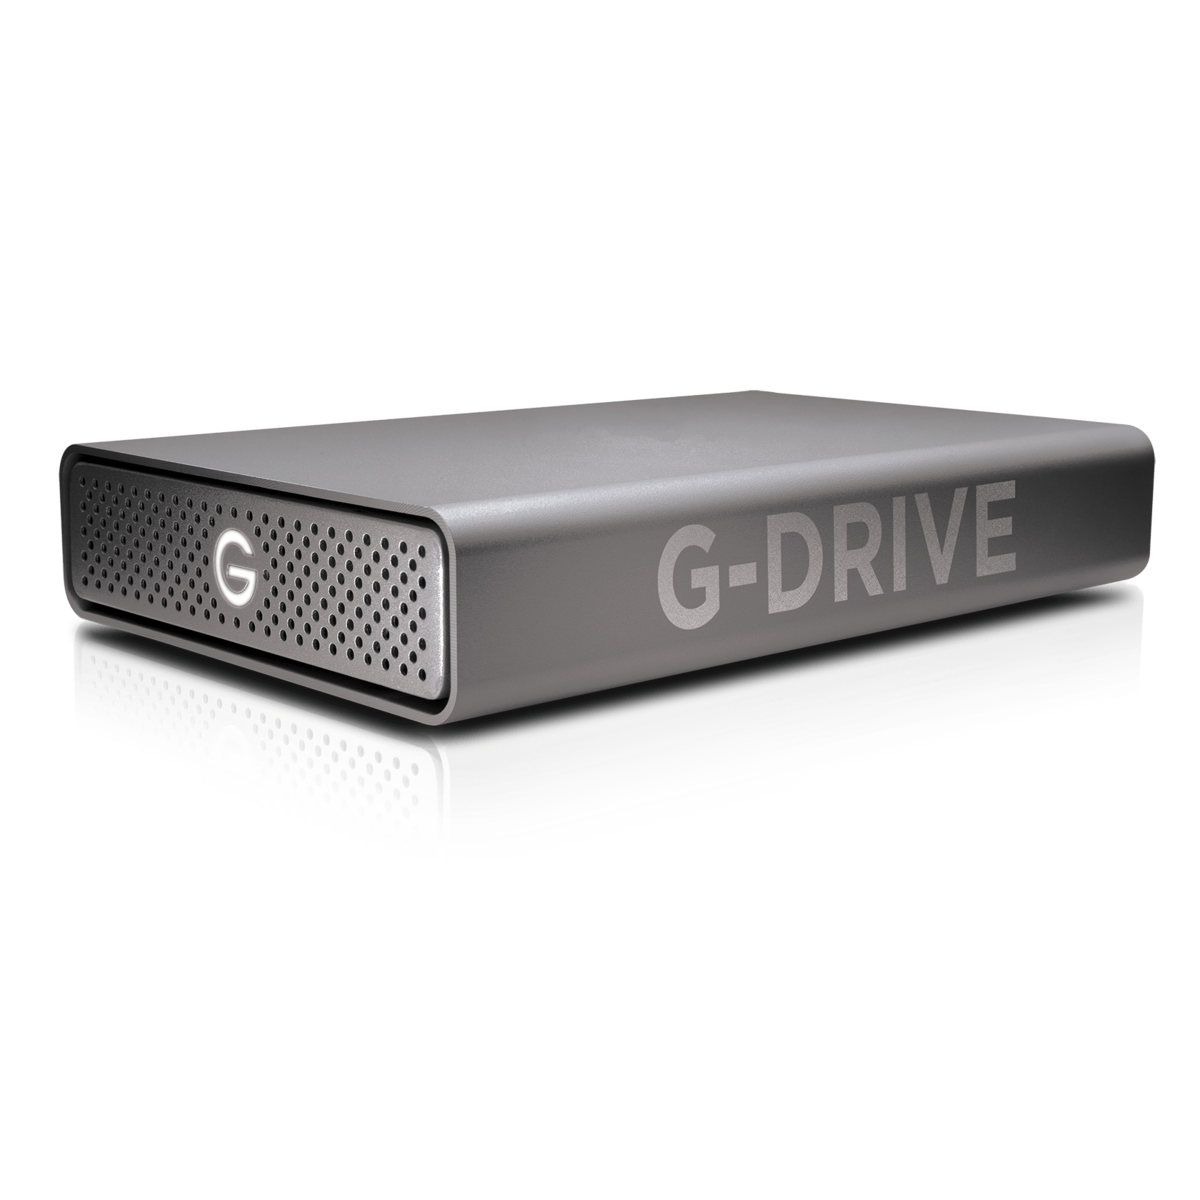 SanDisk Professional G-DRIVE Space Grey 12TB